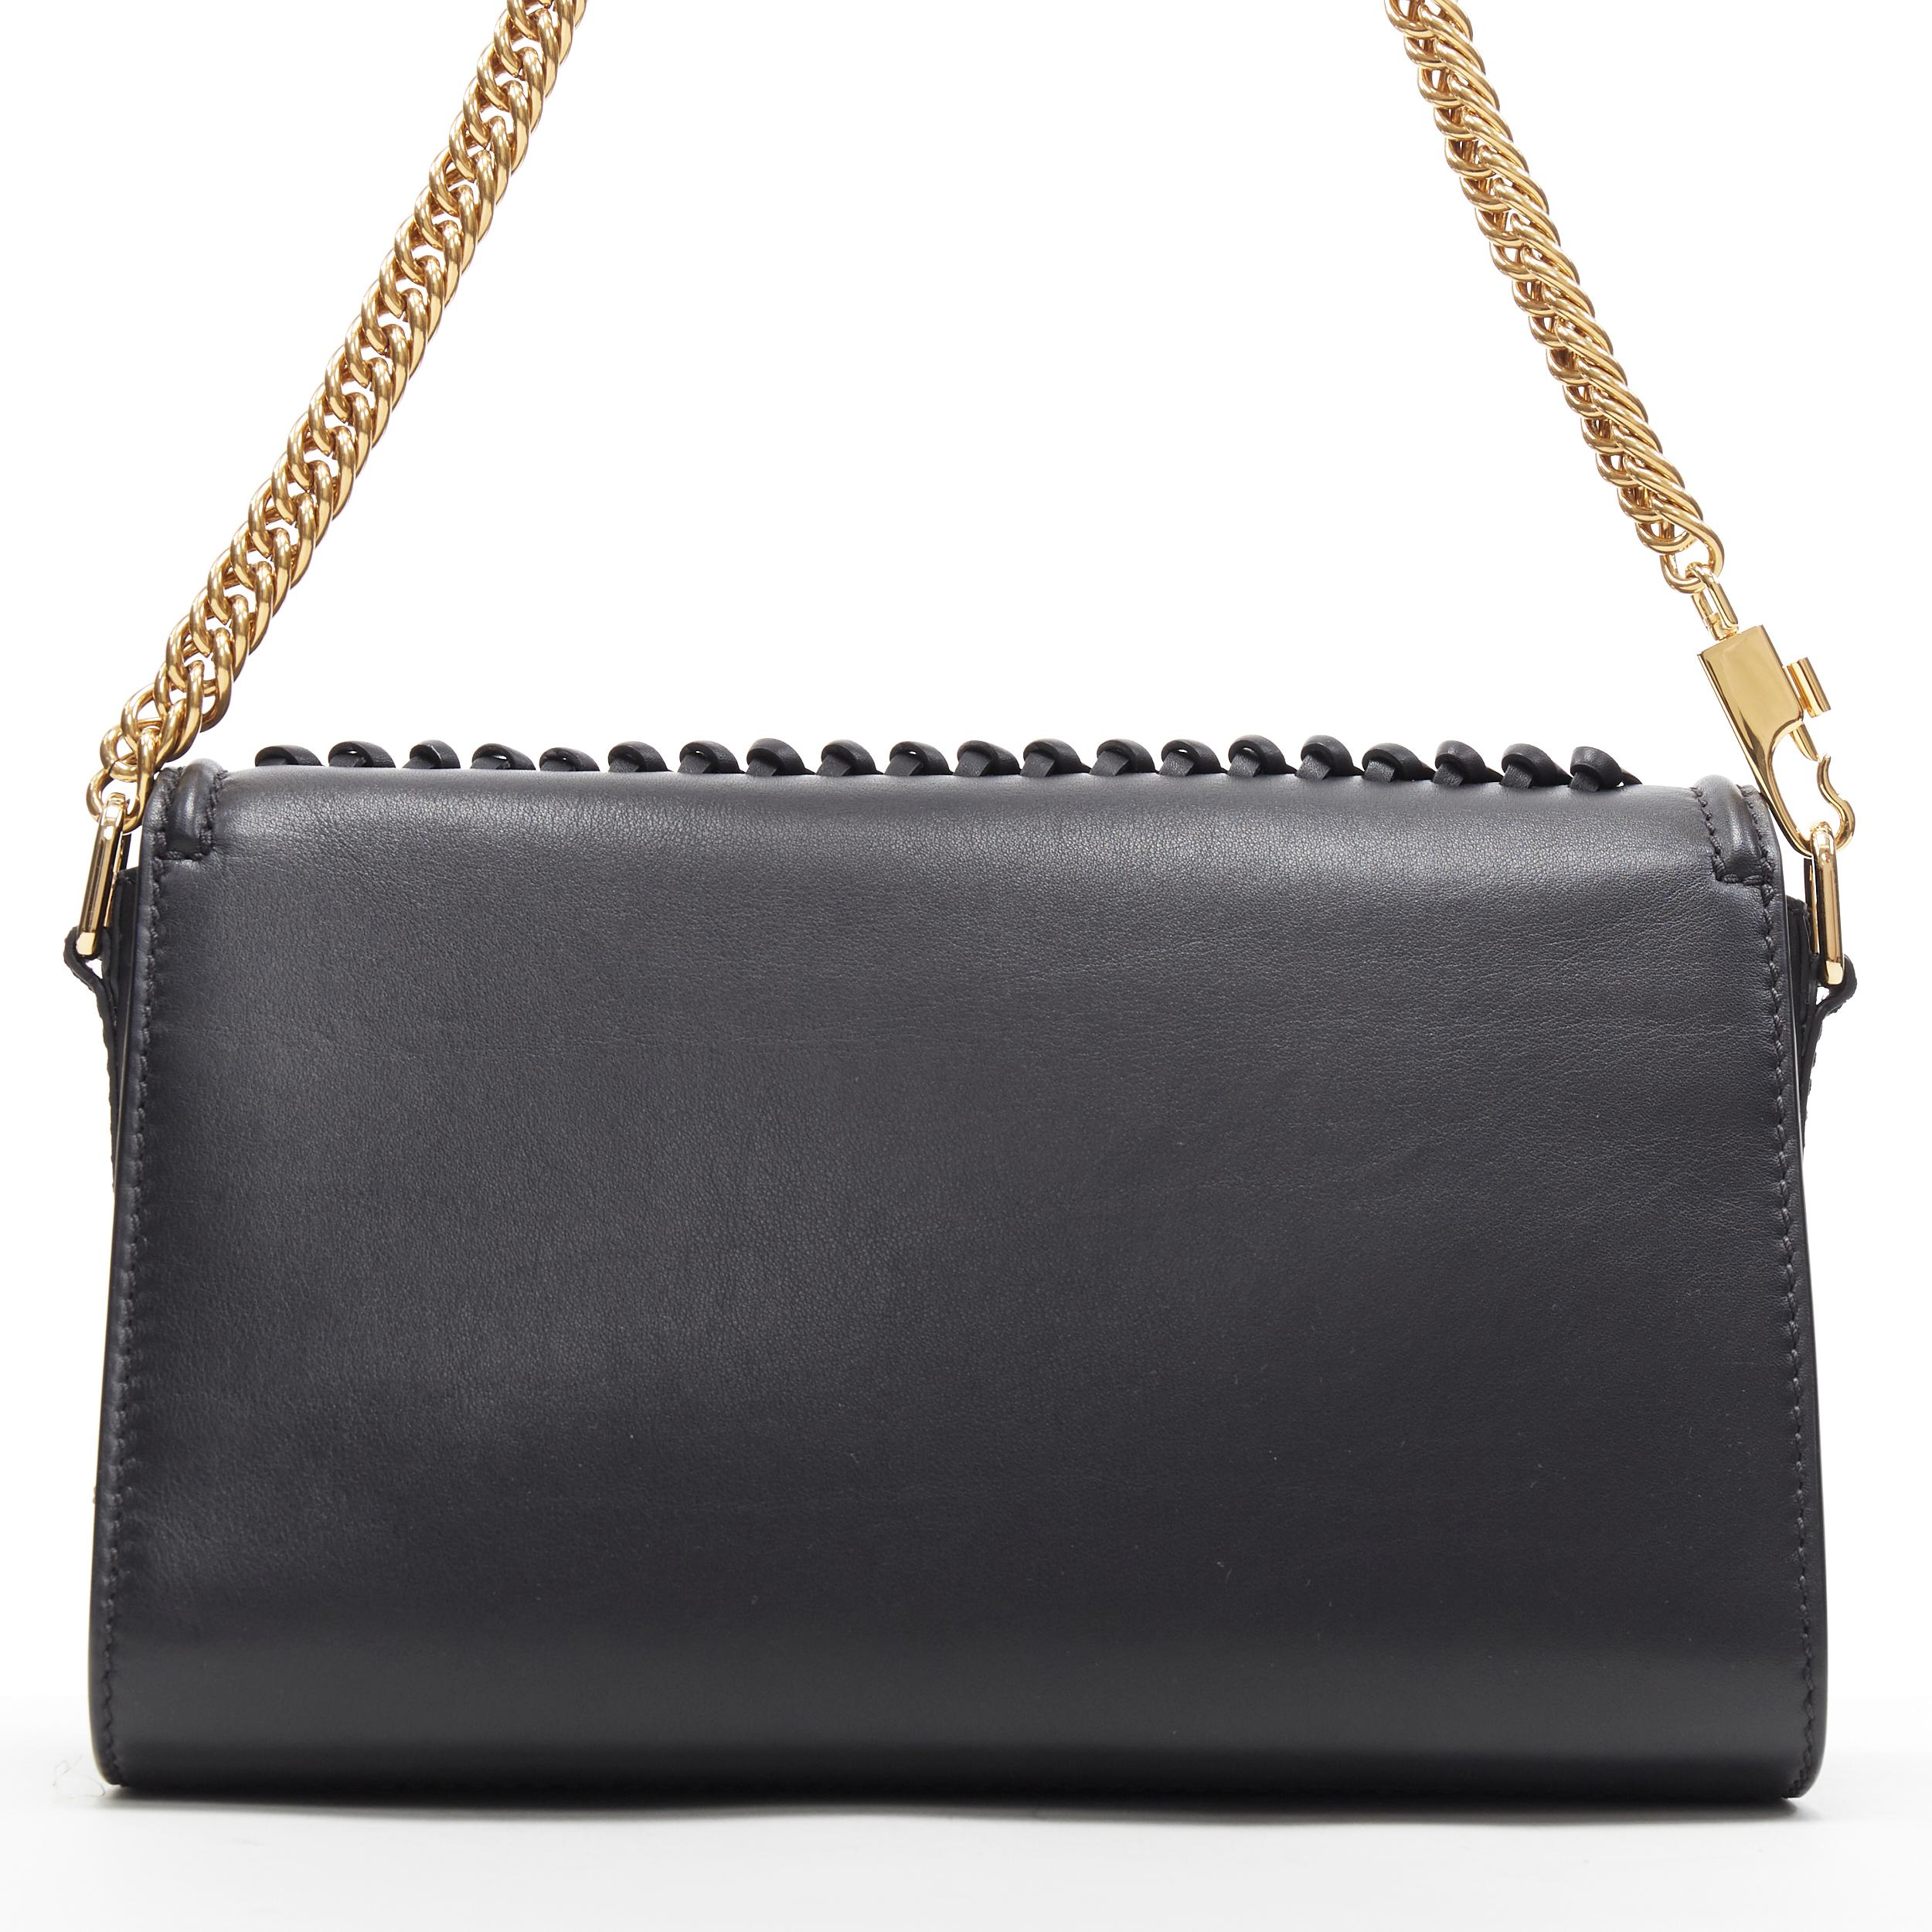 Black new ALEXANDER MCQUEEN The Story black leather whipstitch gold knuckle chain bag